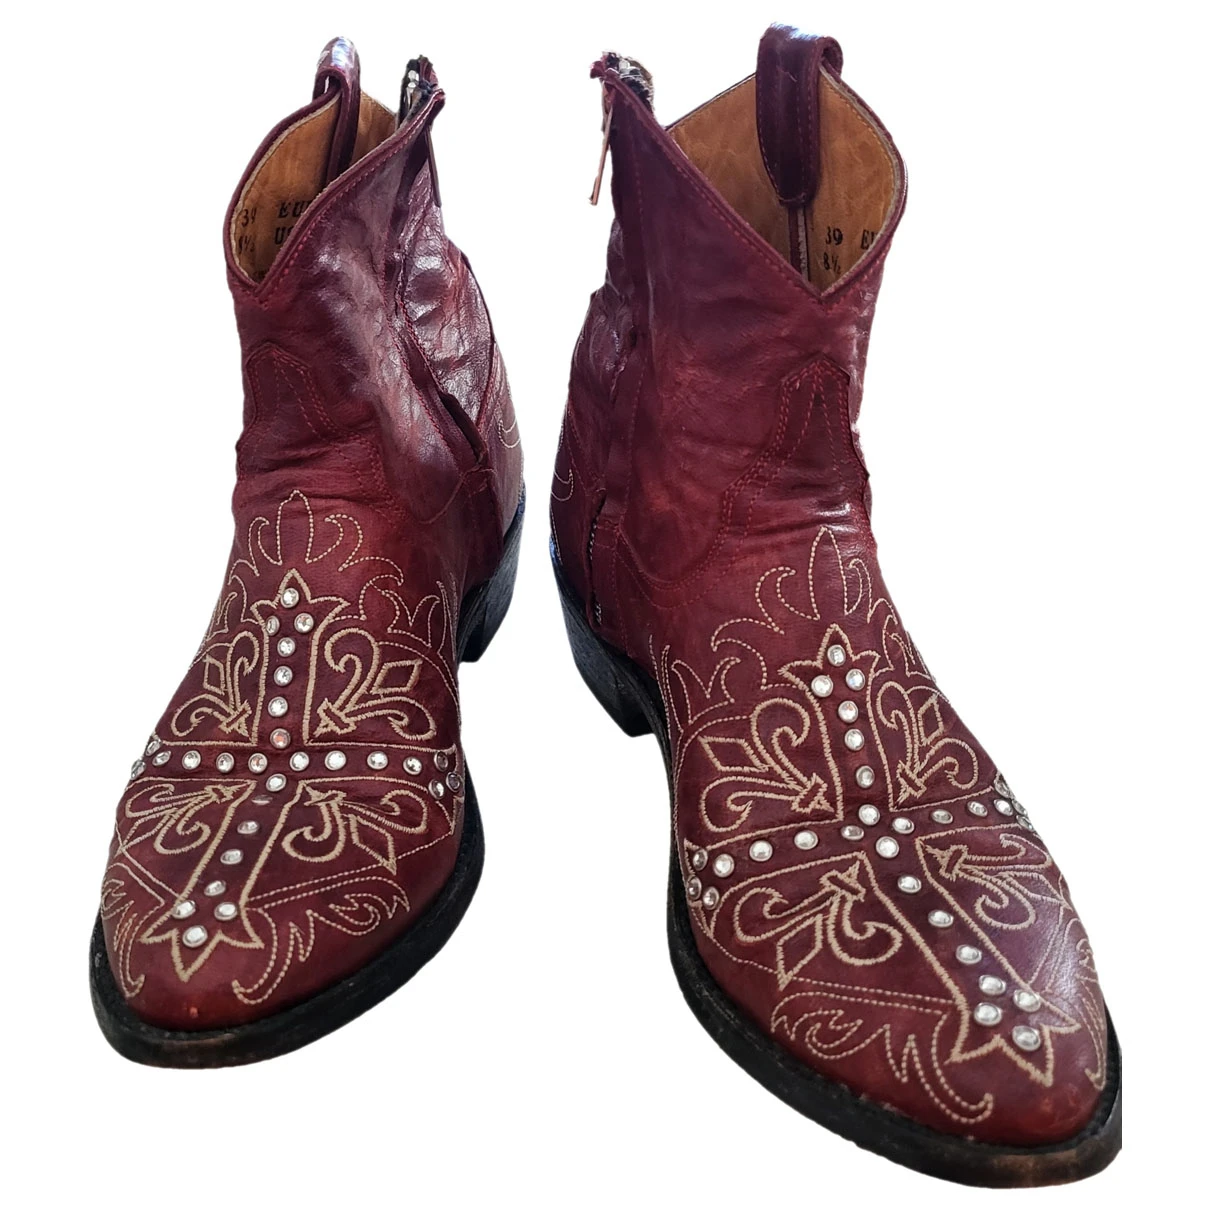 Pre-owned Mexicana Leather Cowboy Boots In Burgundy